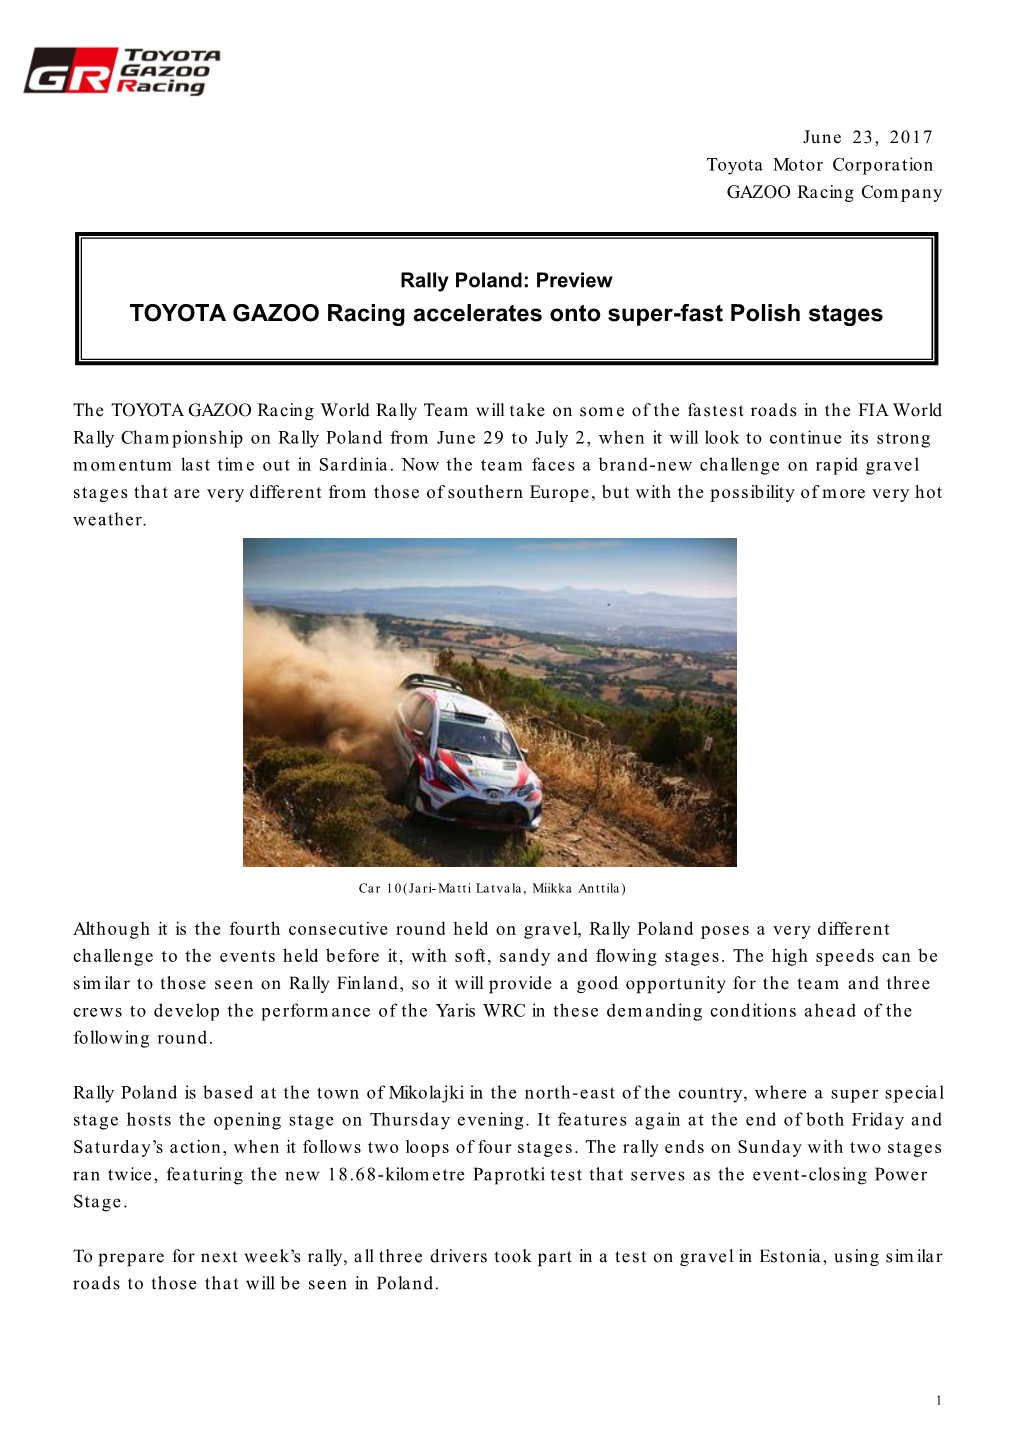 TOYOTA GAZOO Racing Accelerates Onto Super-Fast Polish Stages